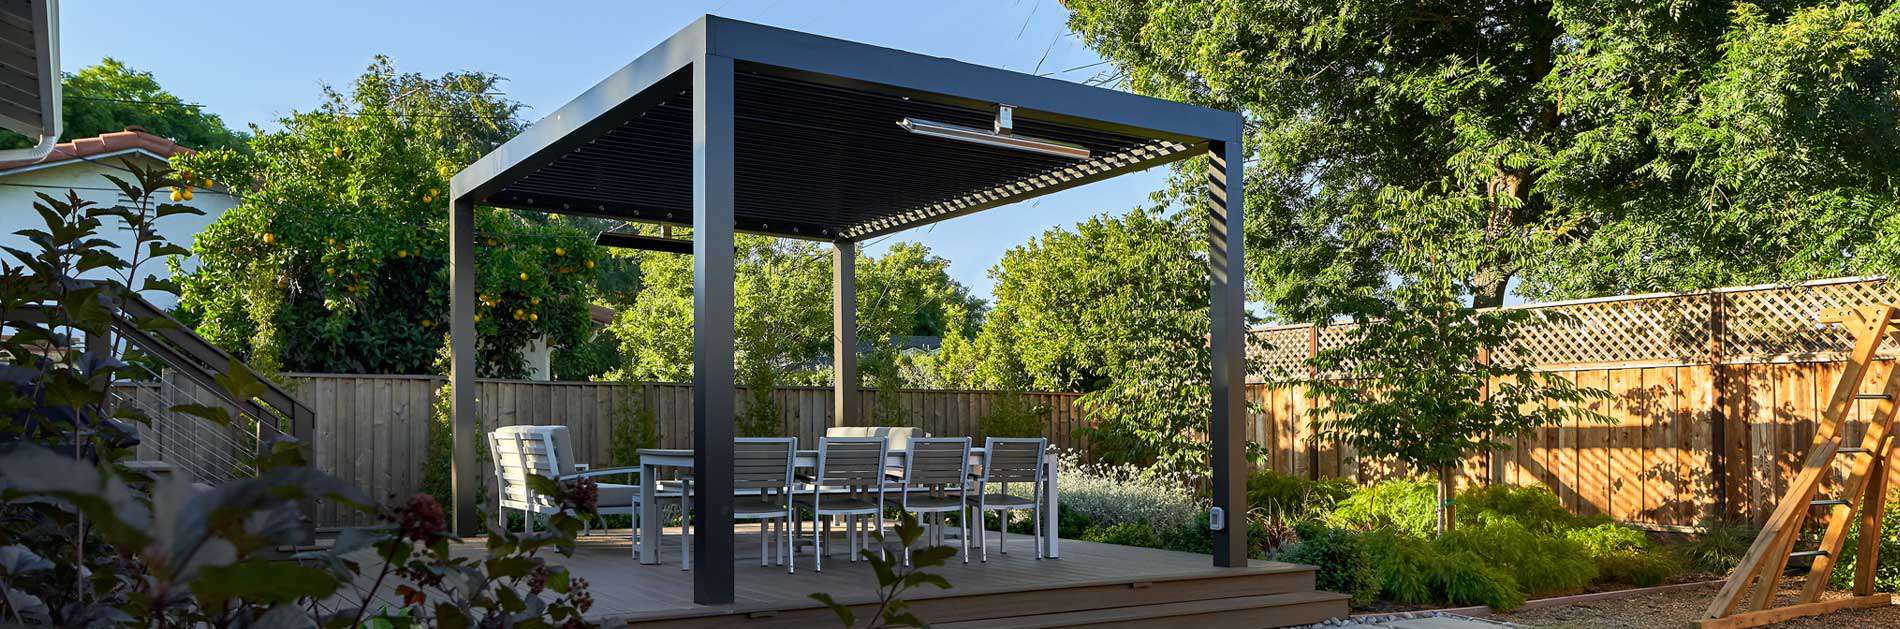 Backyard pergola-covered patio with seating